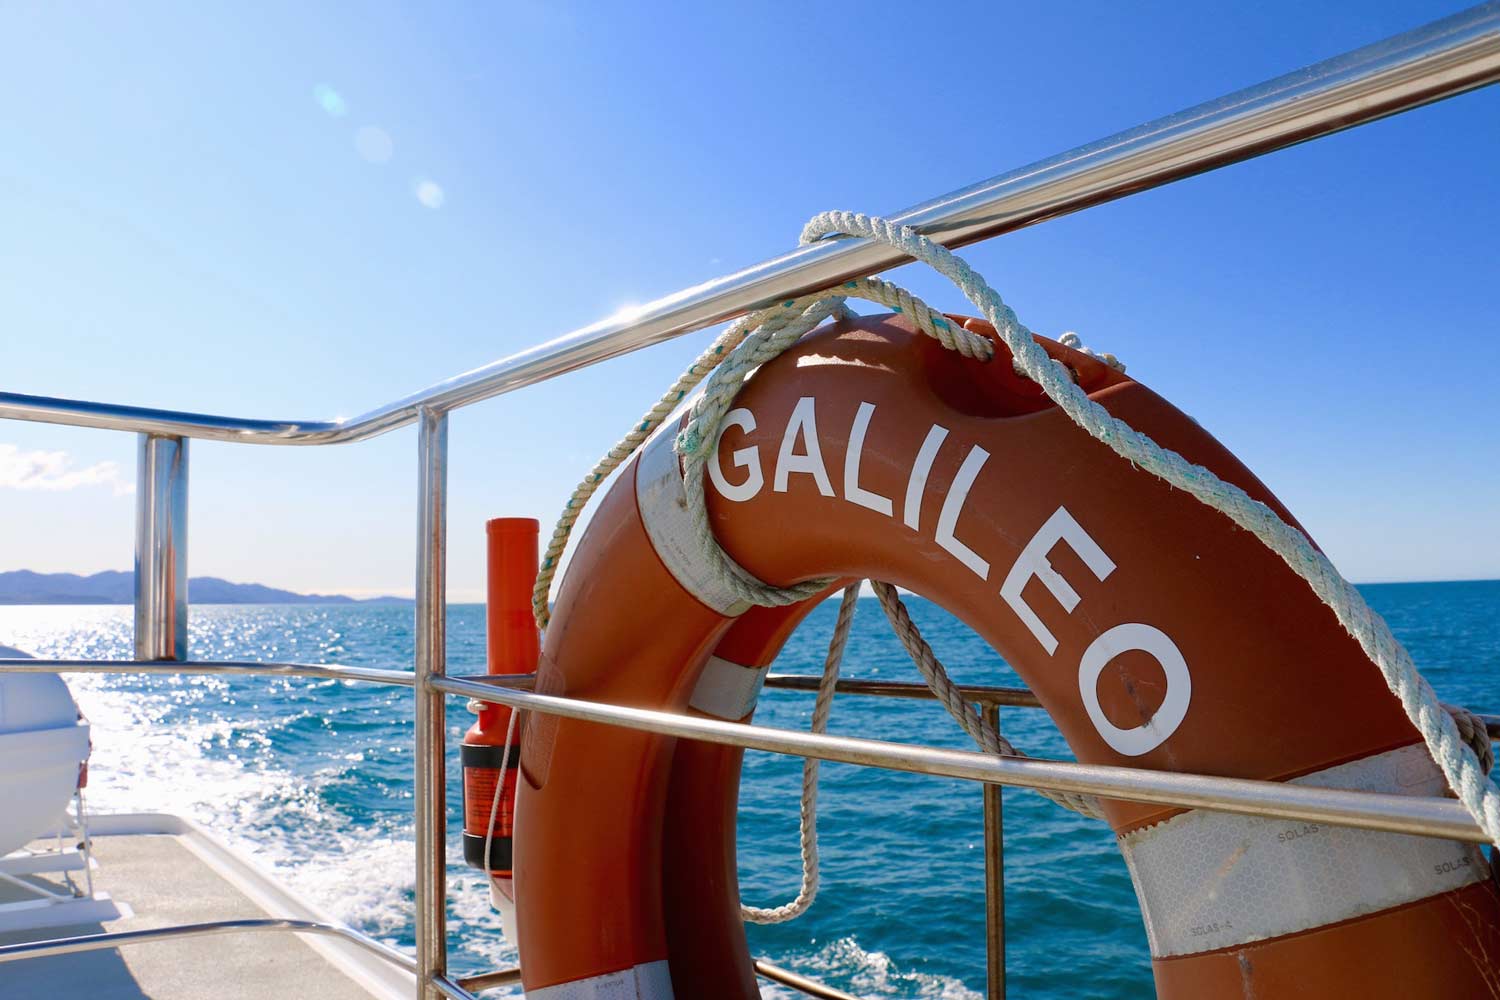 Galileo Charters provide fishing and diving tours and charters throughout New Zealand